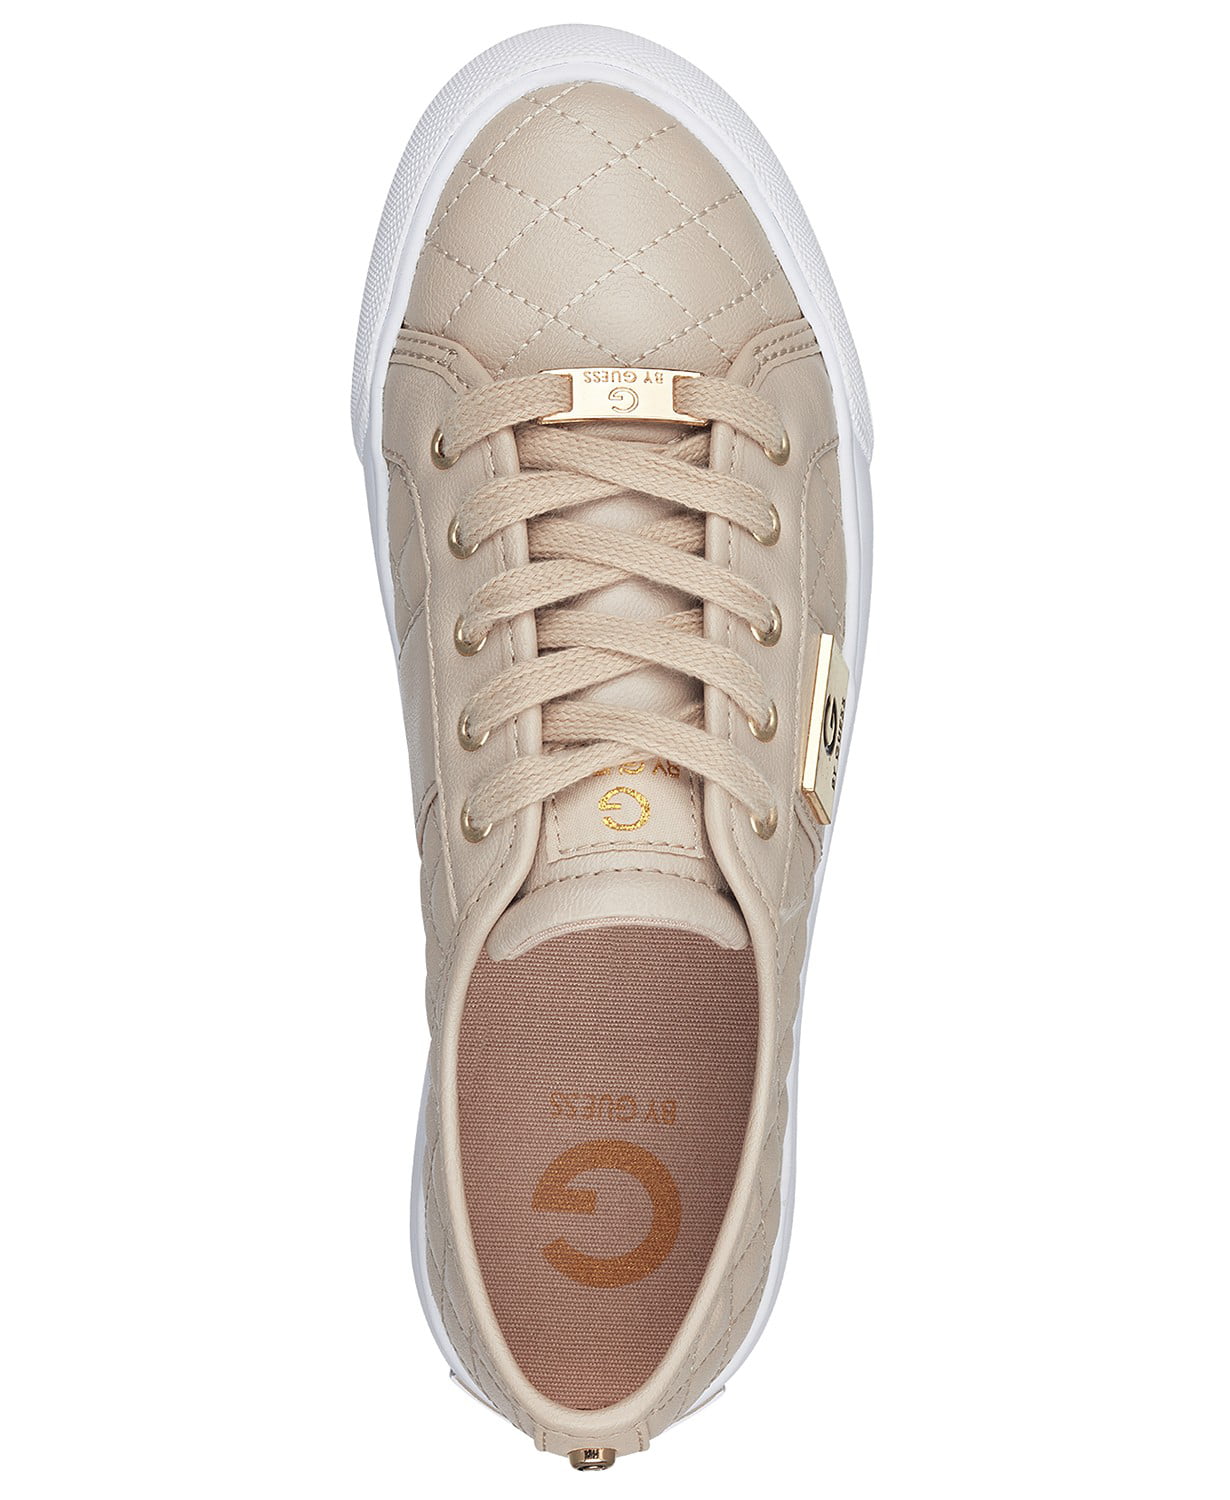 G by Guess Women's Lace Up Leather Quilted Pattern Sneakers Shoes Light Natural 